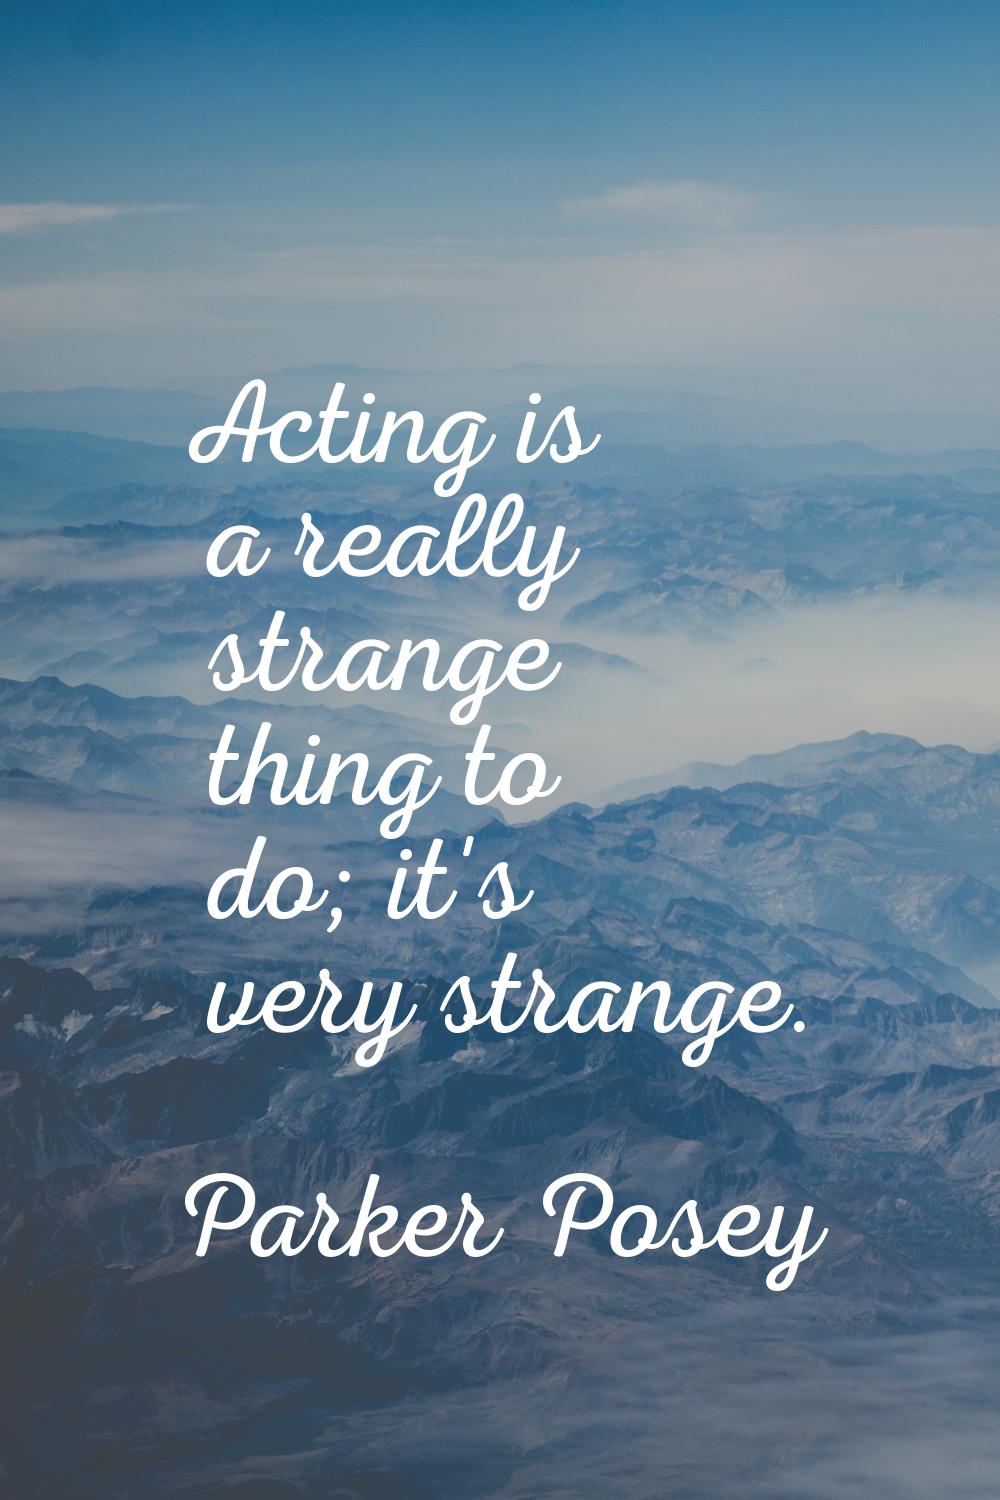 Acting is a really strange thing to do; it's very strange.